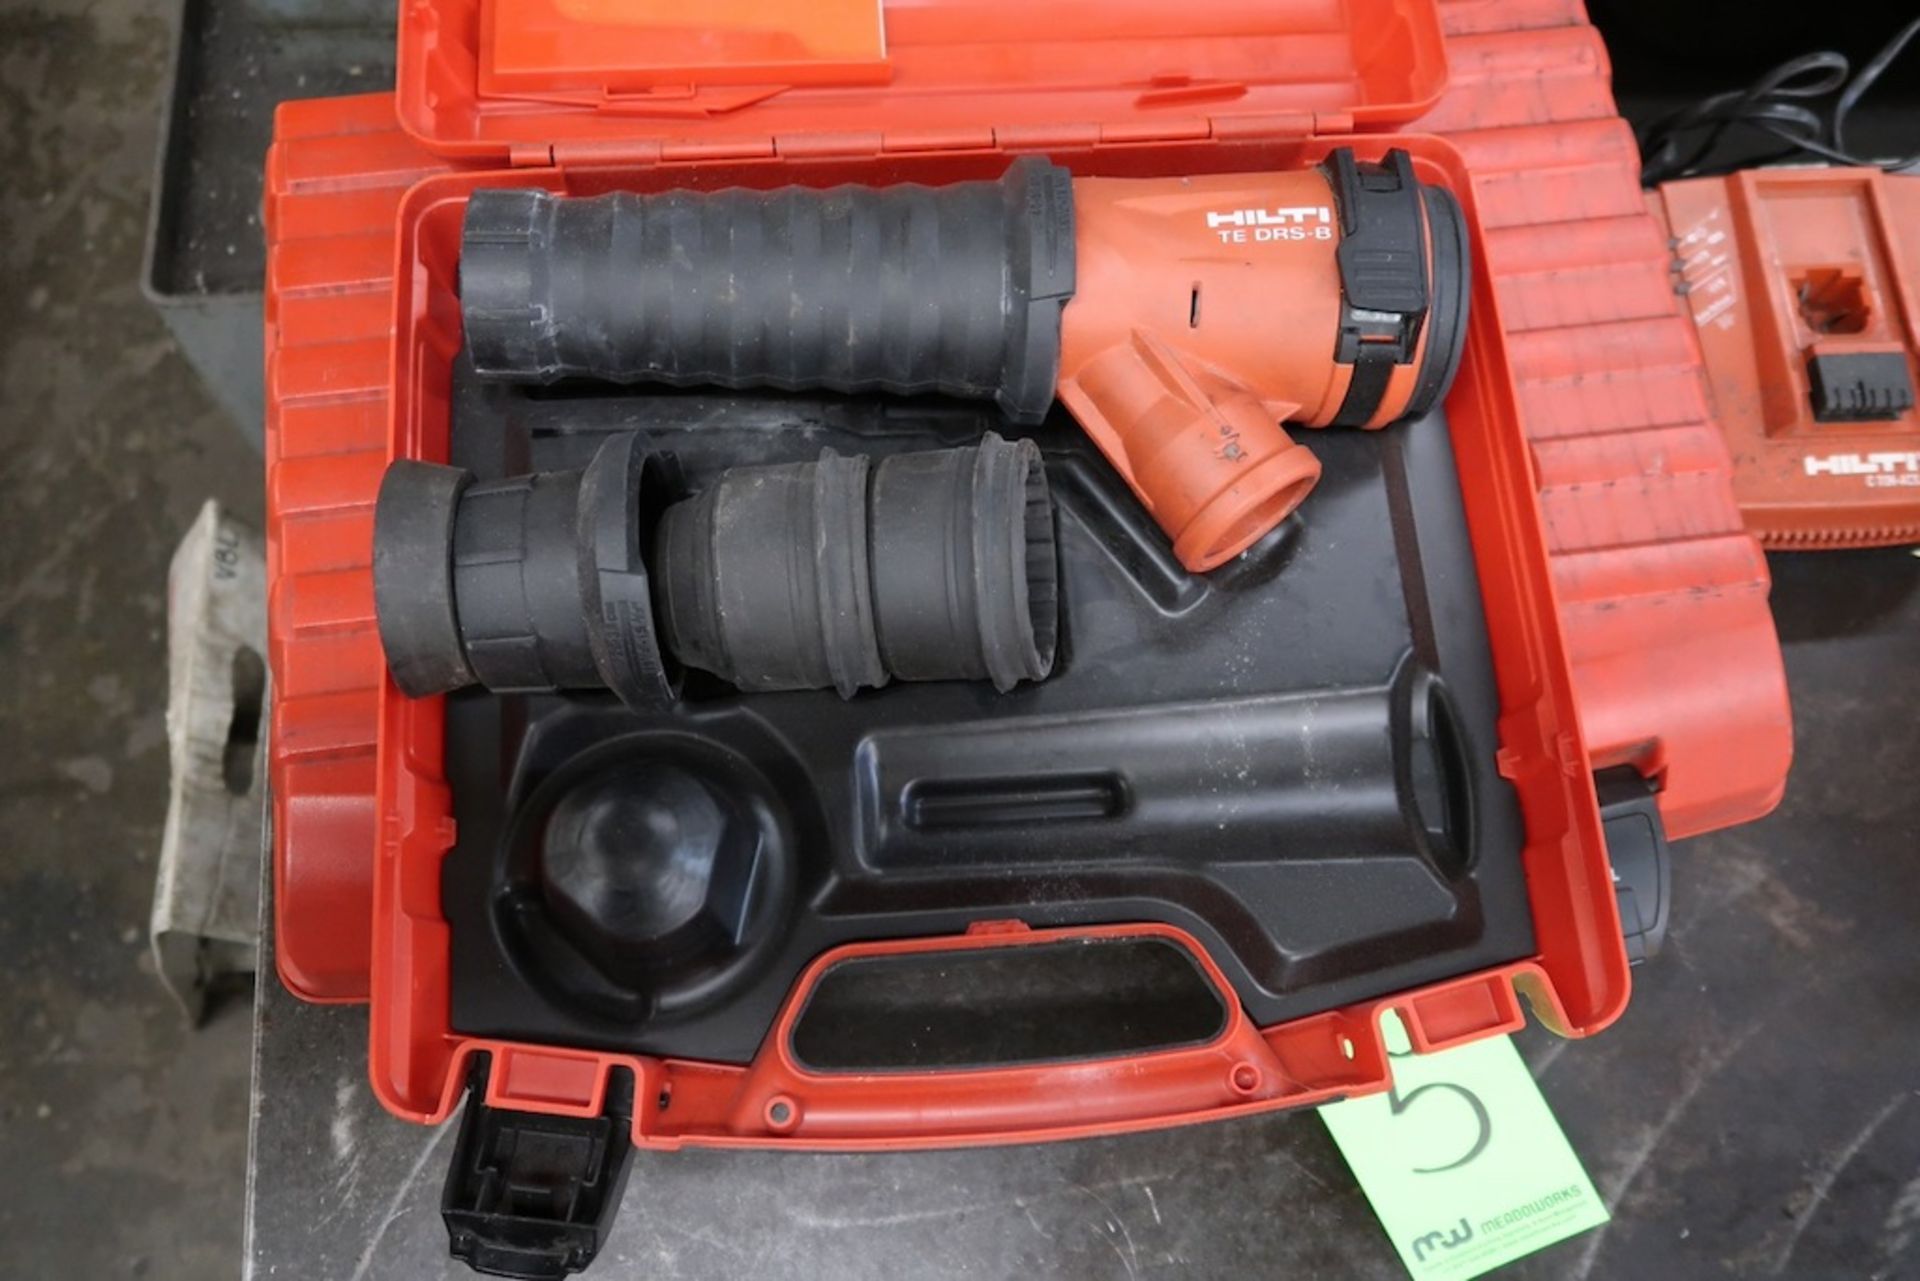 Hilti TE 6-A 36V Cordless Electric Rotary Hammer Drill - Image 2 of 3